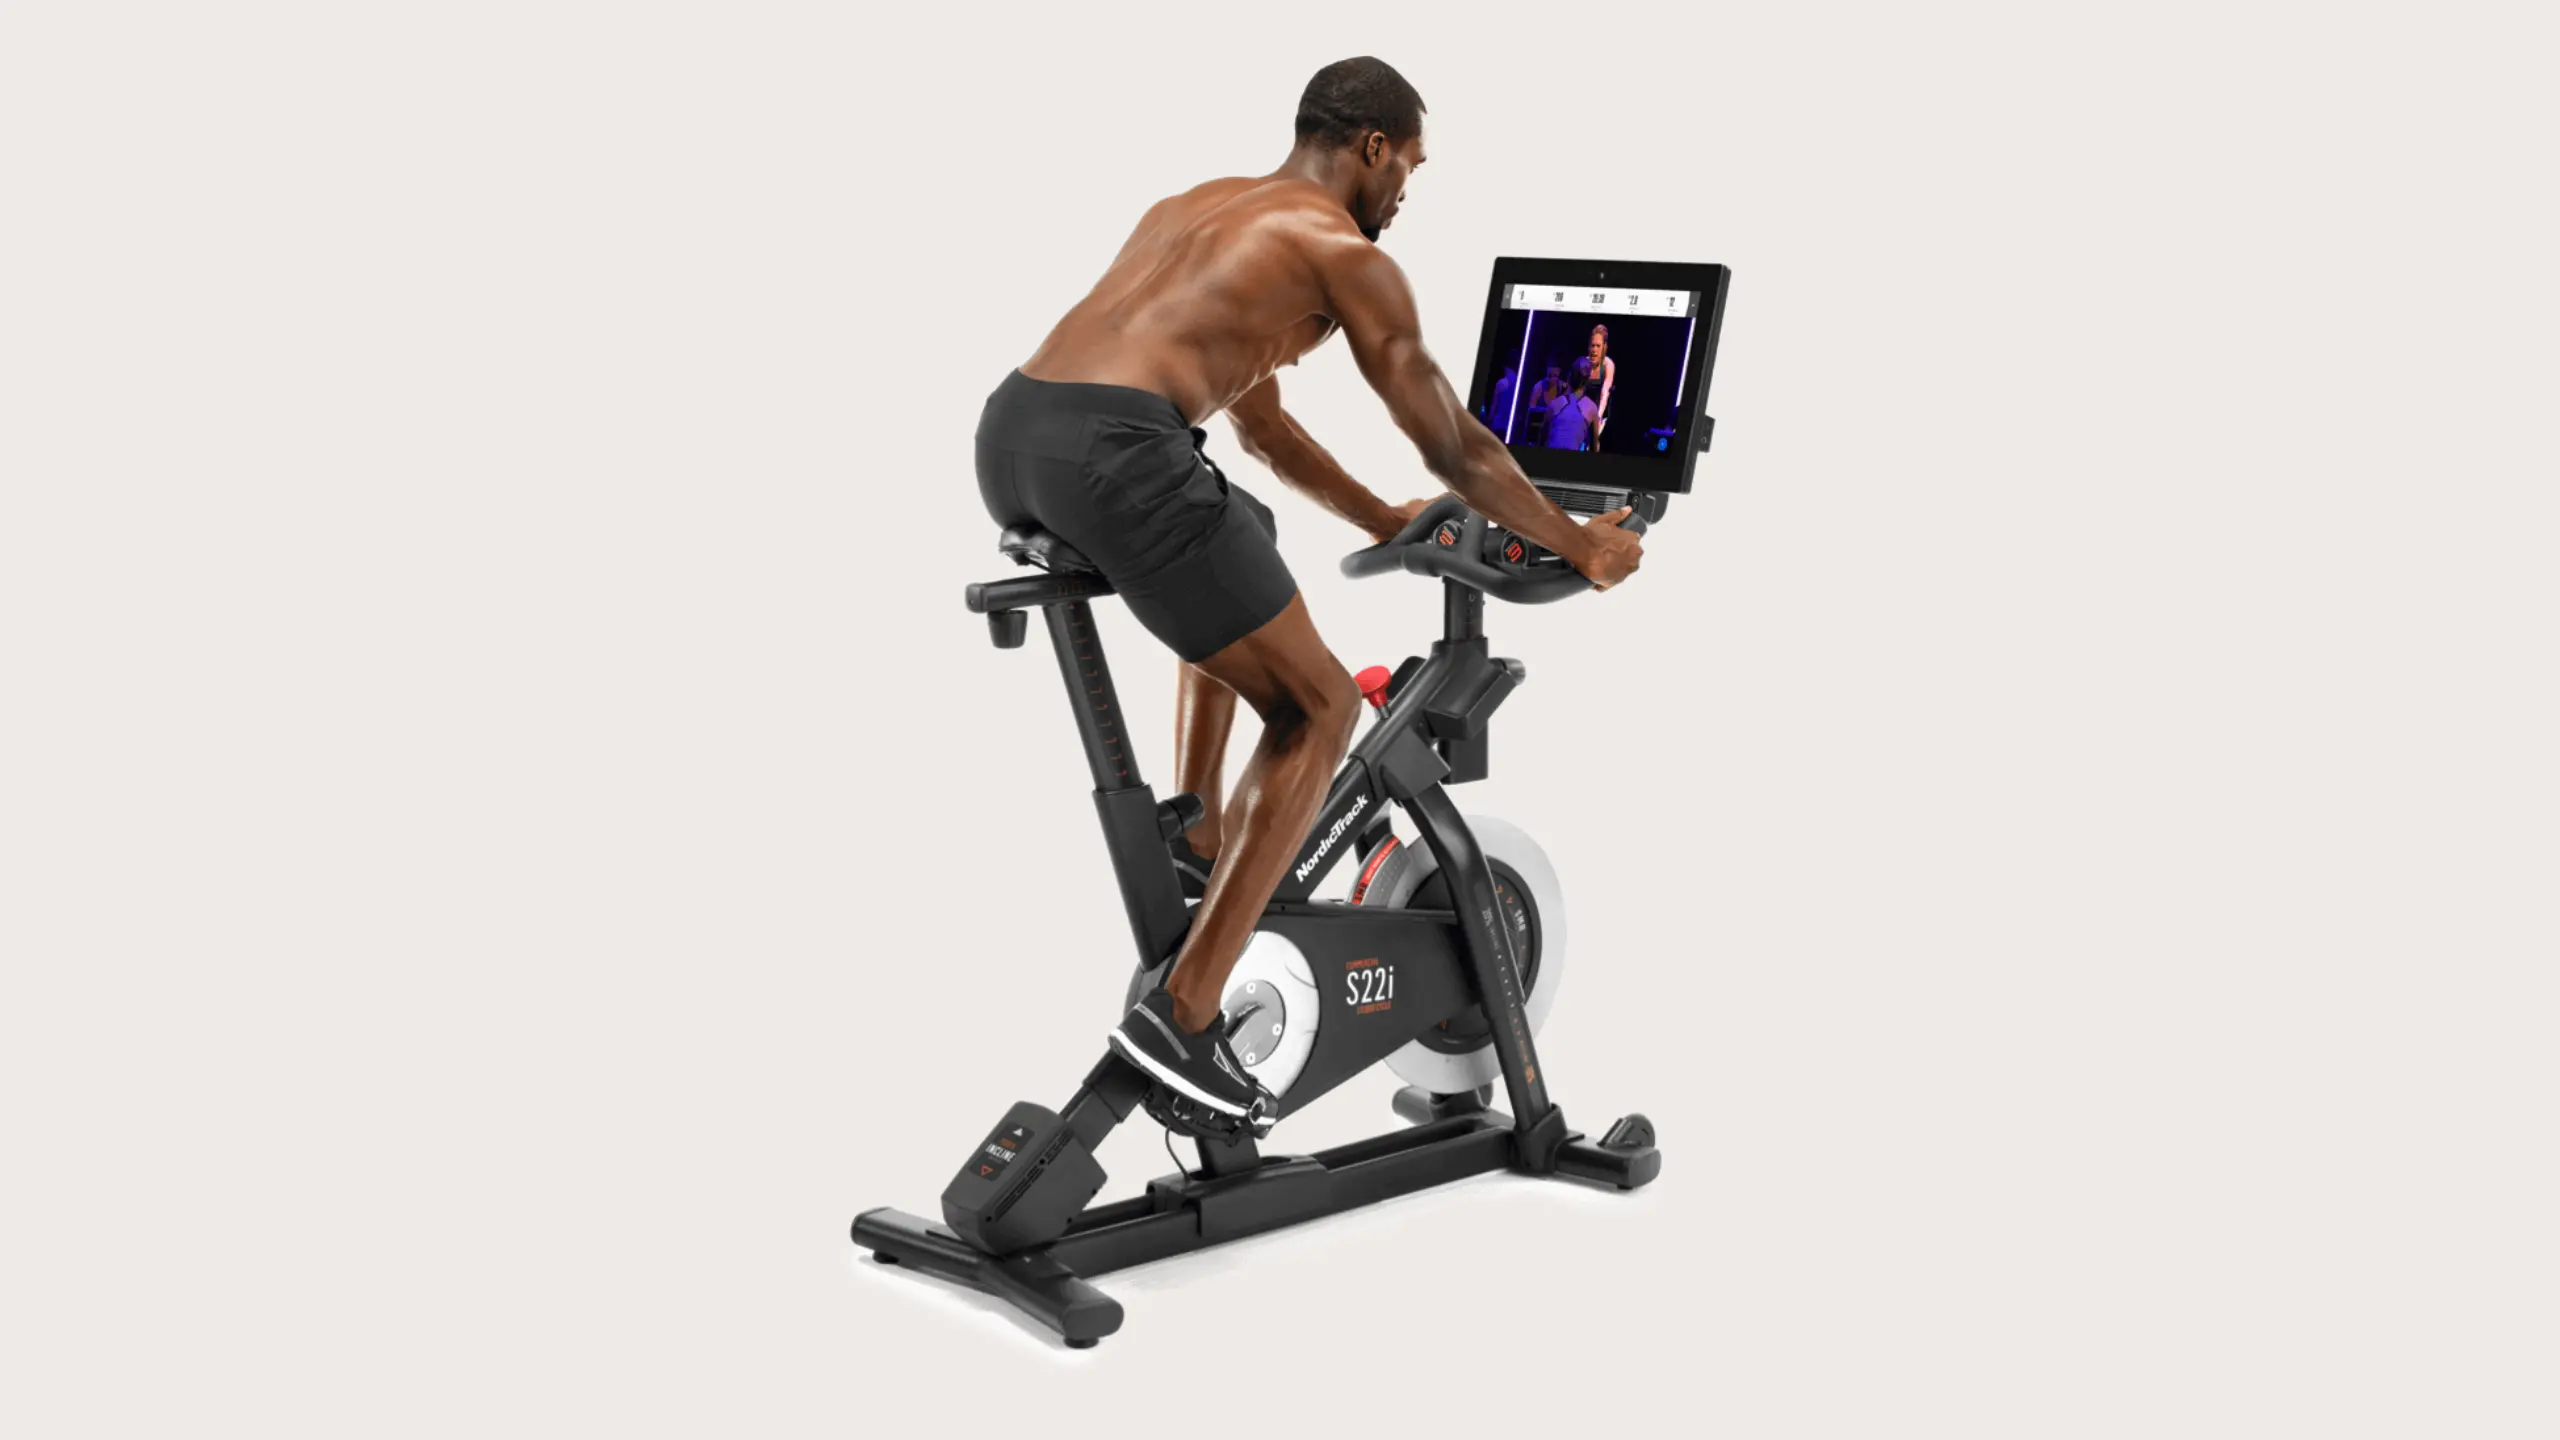 WHAT IS A CHEAPER ALTERNATIVE TO PELOTON